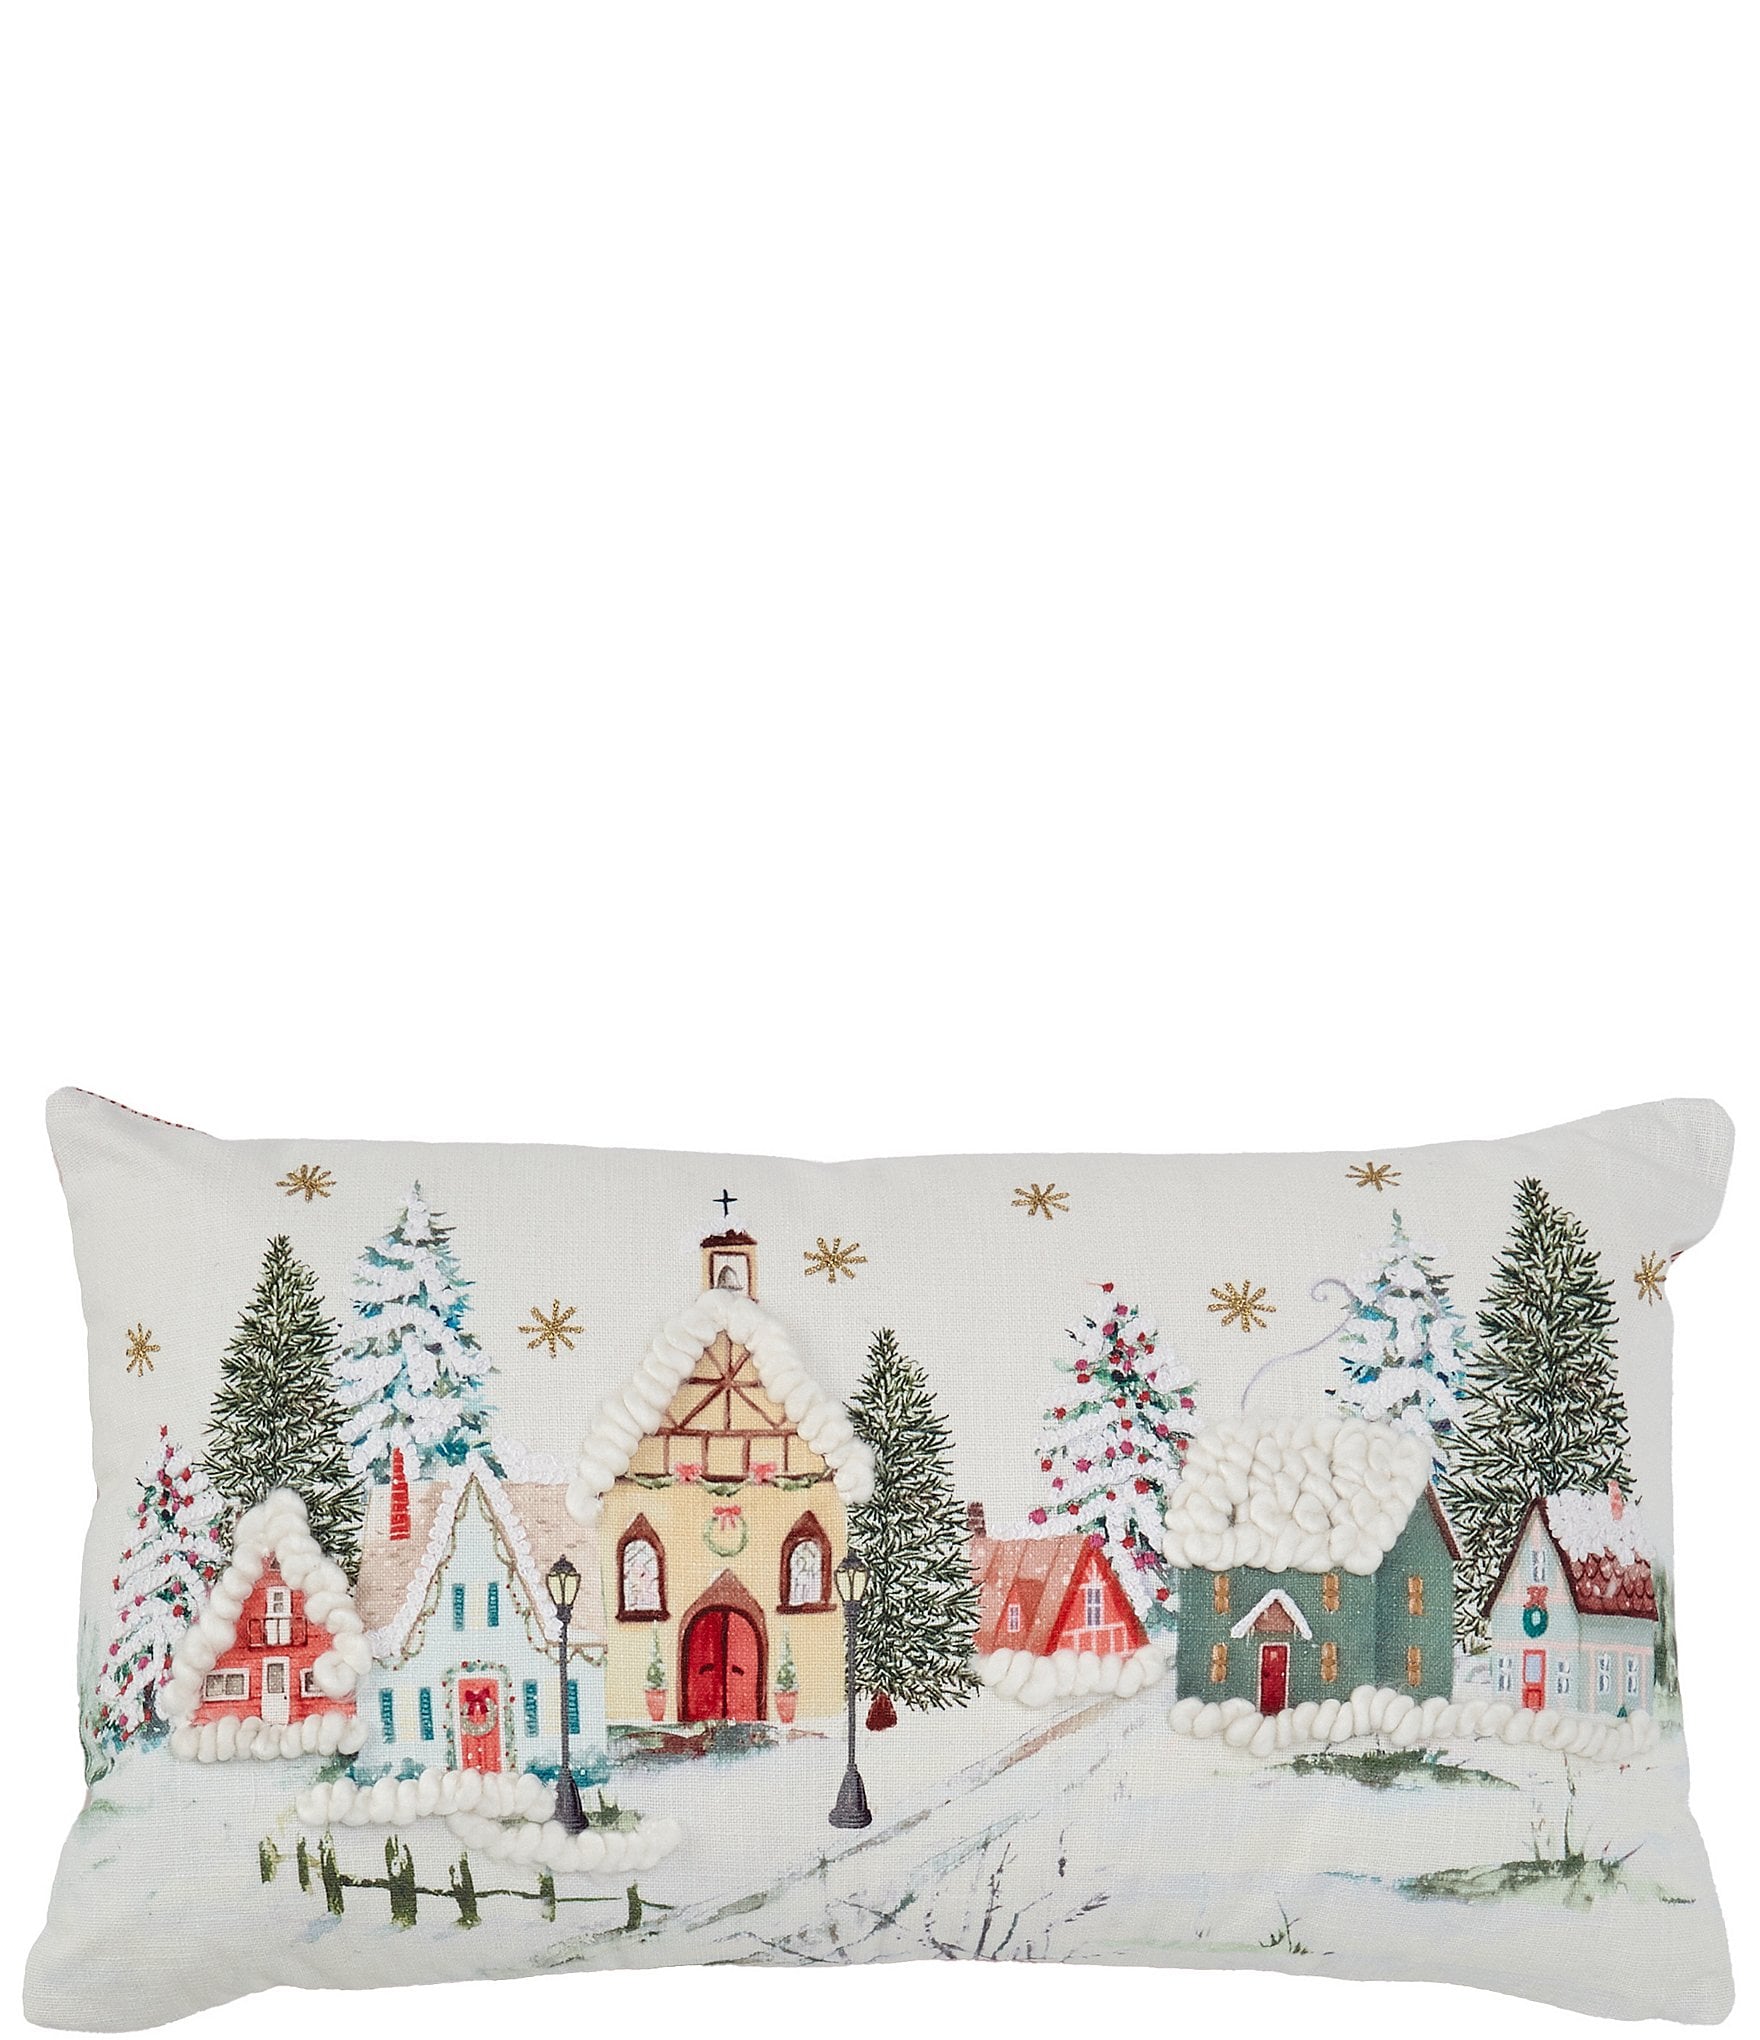 https://dimg.dillards.com/is/image/DillardsZoom/zoom/southern-living-holiday-collection-christmas-city-embroidered-reversible-lumbar-pillow/00000000_zi_3637e2d4-87cb-43d9-a49f-1a8bd911d162.jpg